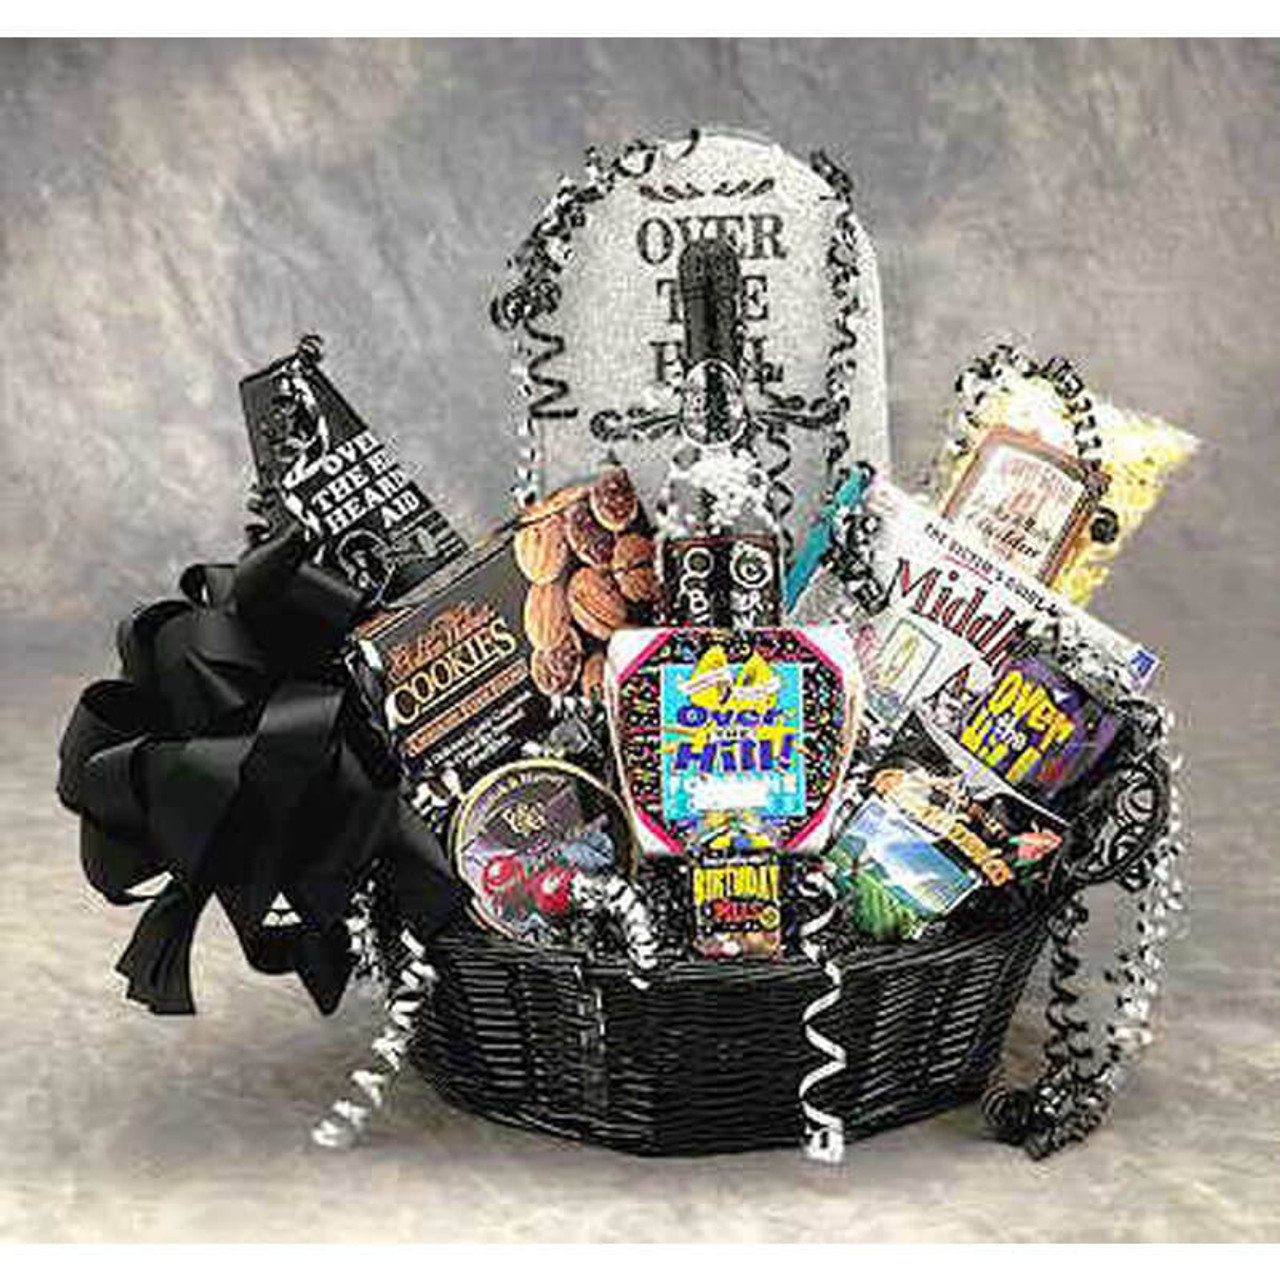 https://cdn11.bigcommerce.com/s-cz44ad1pu6/images/stencil/1280x1280/products/1501/4767/Over-the-Hill-Birthday-Gift-Basket__02694.1538353380.jpg?c=2